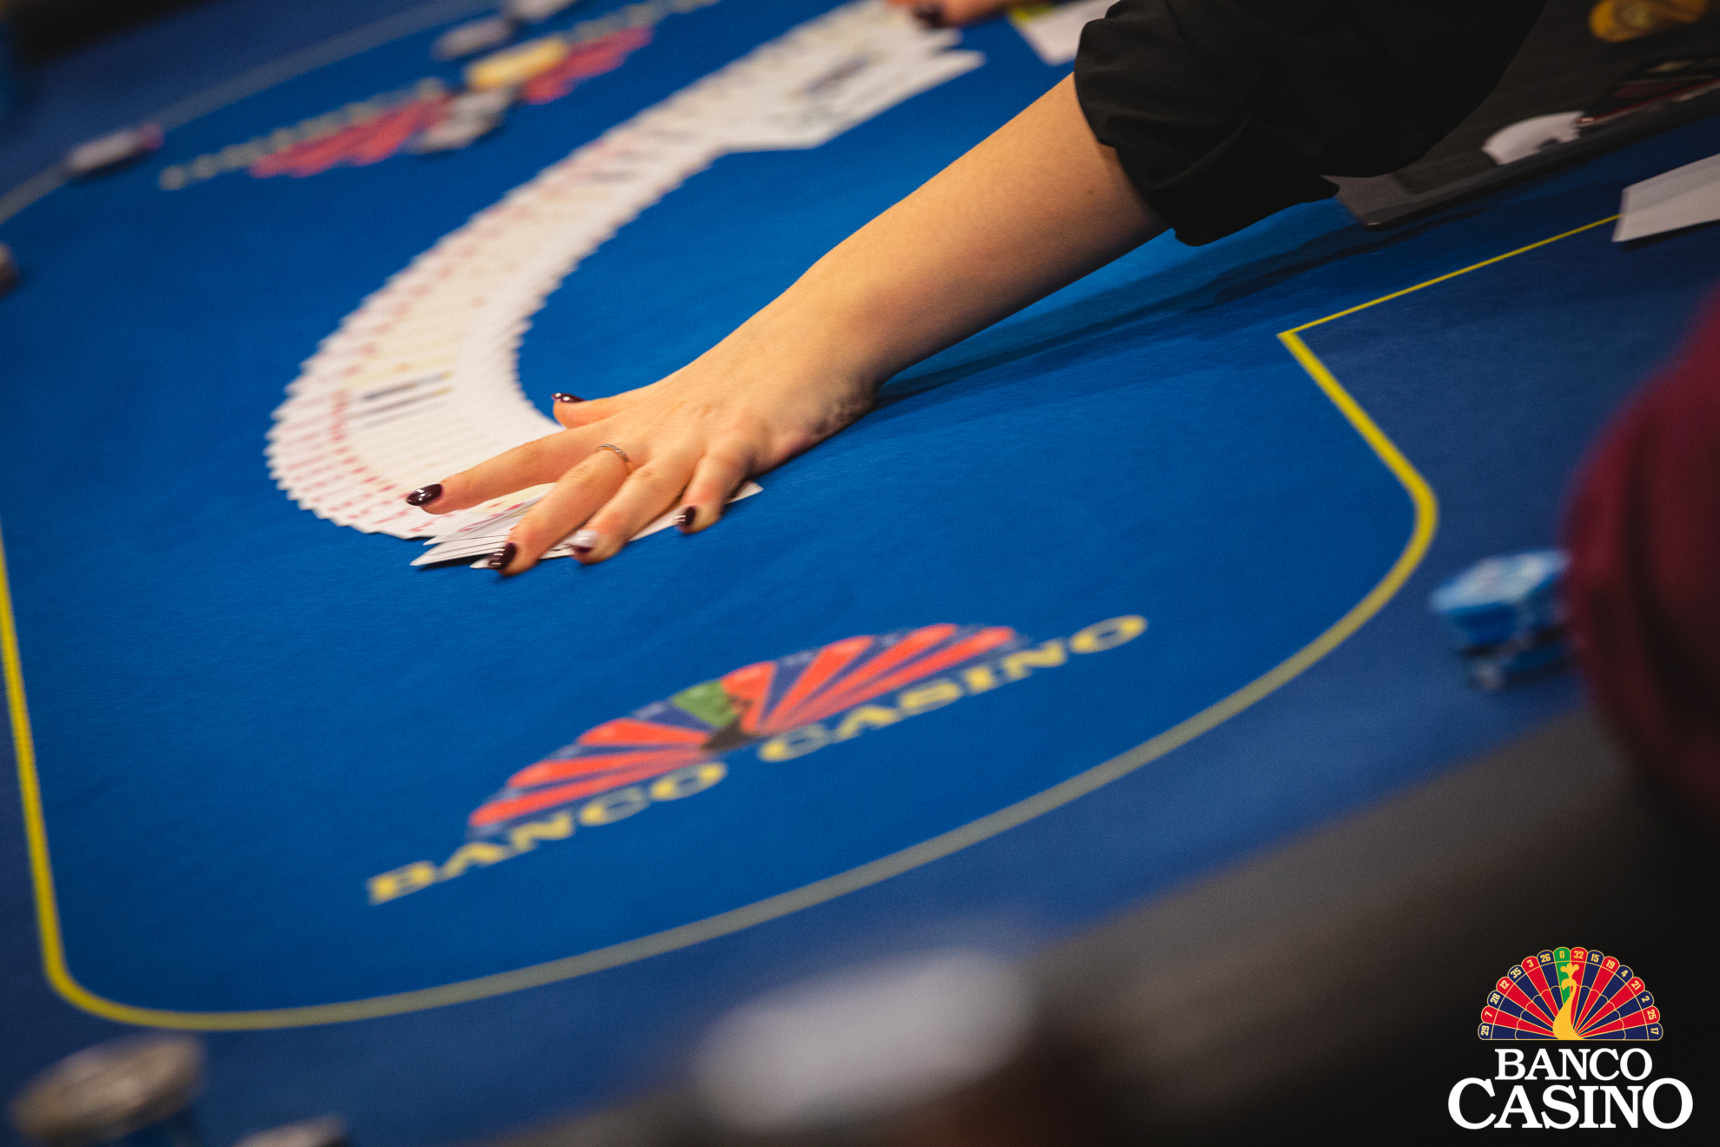 SOPC MAIN EVENT: MORE THAN A QUARTER MILLION EUR WILL BE PLAYED FOR!